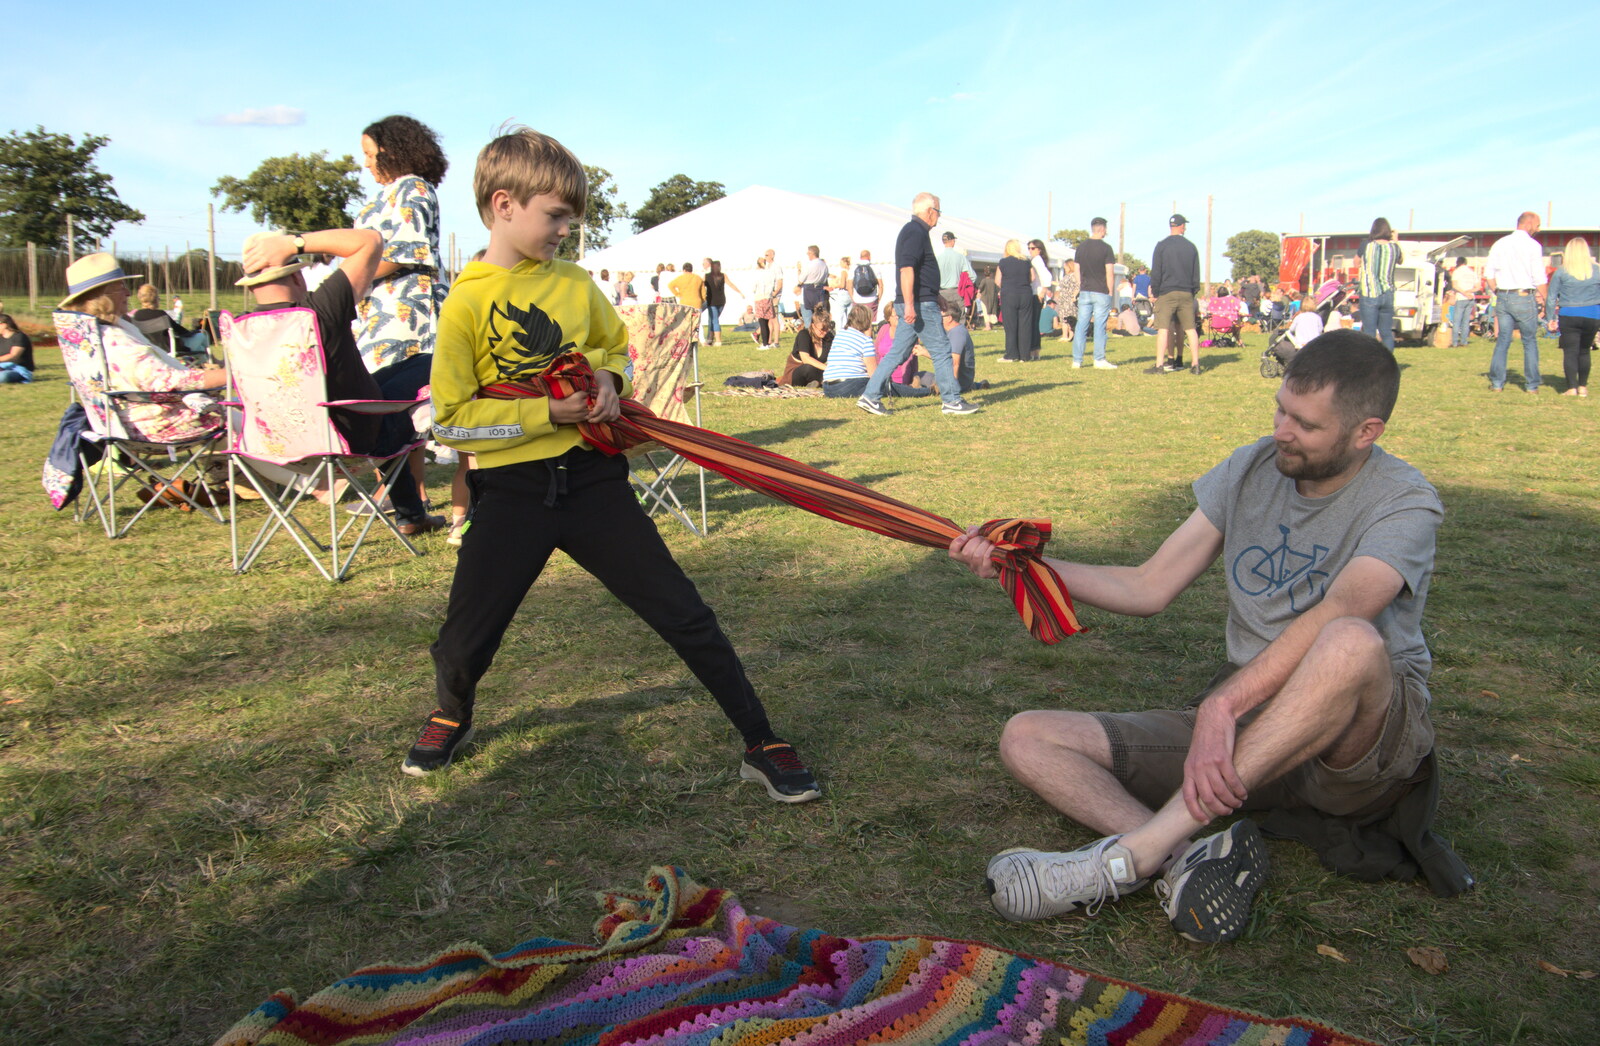 Harry plays tug o' war with The Boy Phil from Star Wing's Hops and Hogs Festival, Redgrave, Suffolk - 12th September 2020